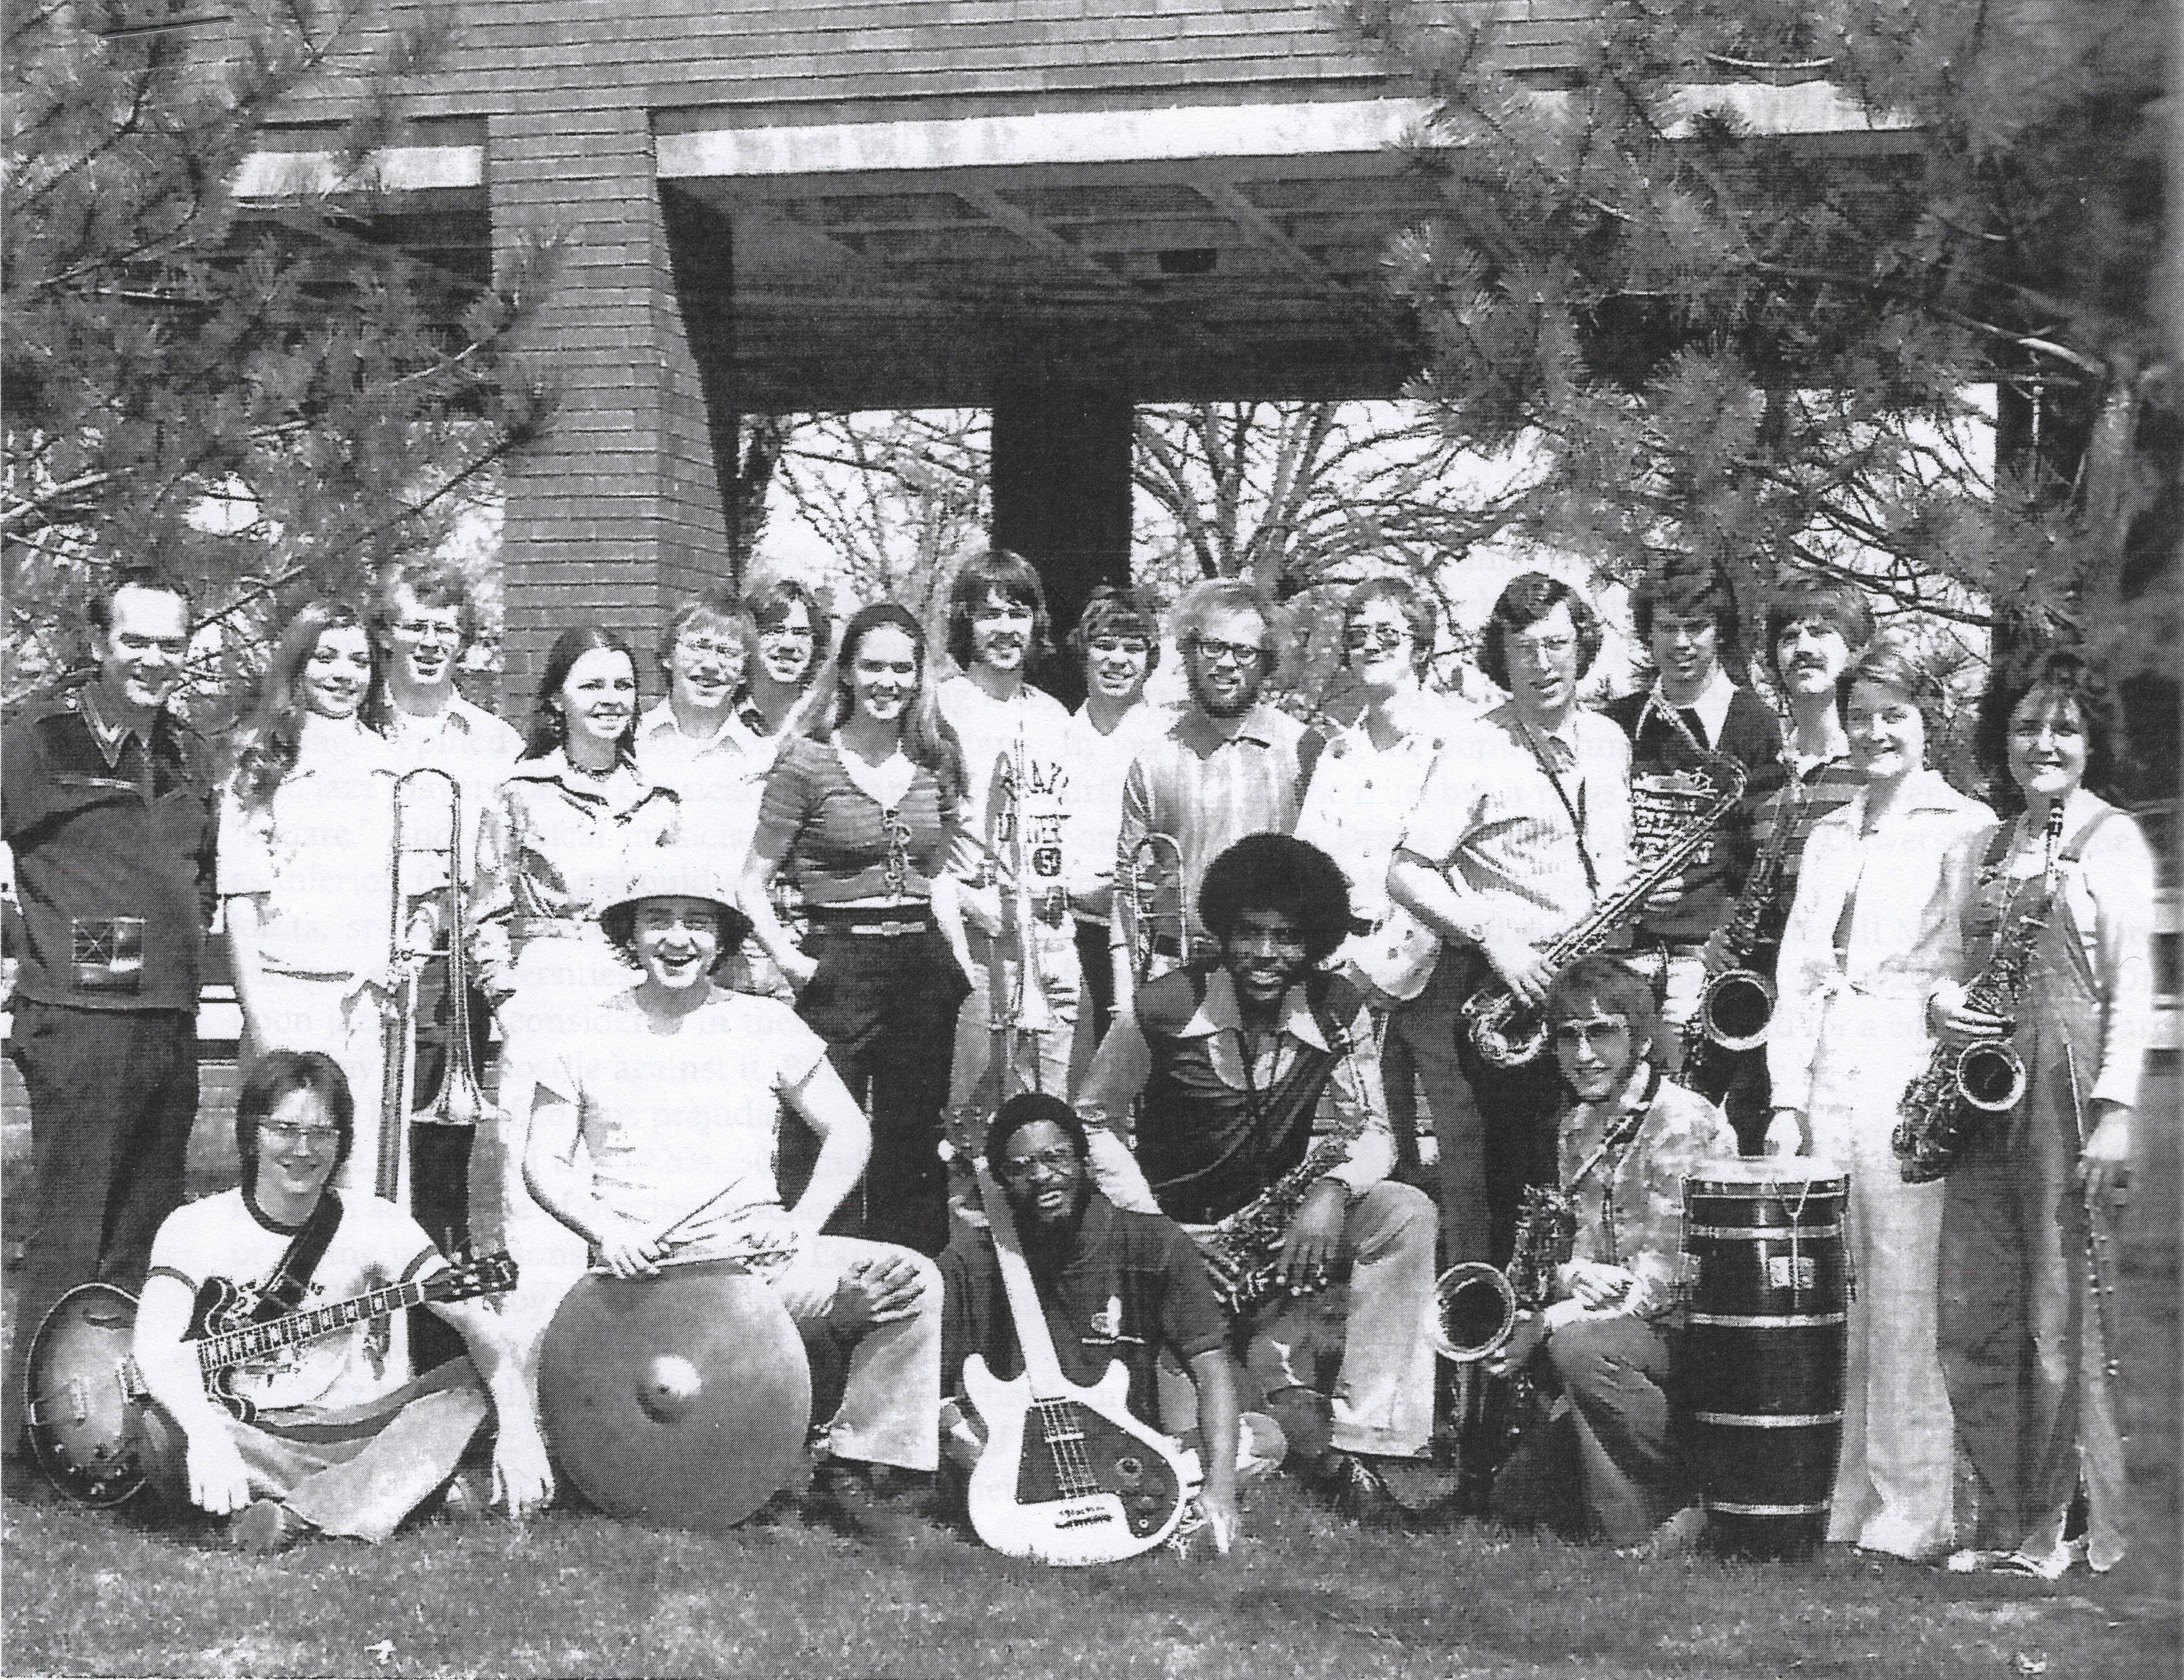 Dartanyan Brown and the members of the Drake University Jazz Band in 1974. He is seated front row center with his bass. Future wife Marcia Miget is at the end of the second row, on the right, holding her saxophone and flute.